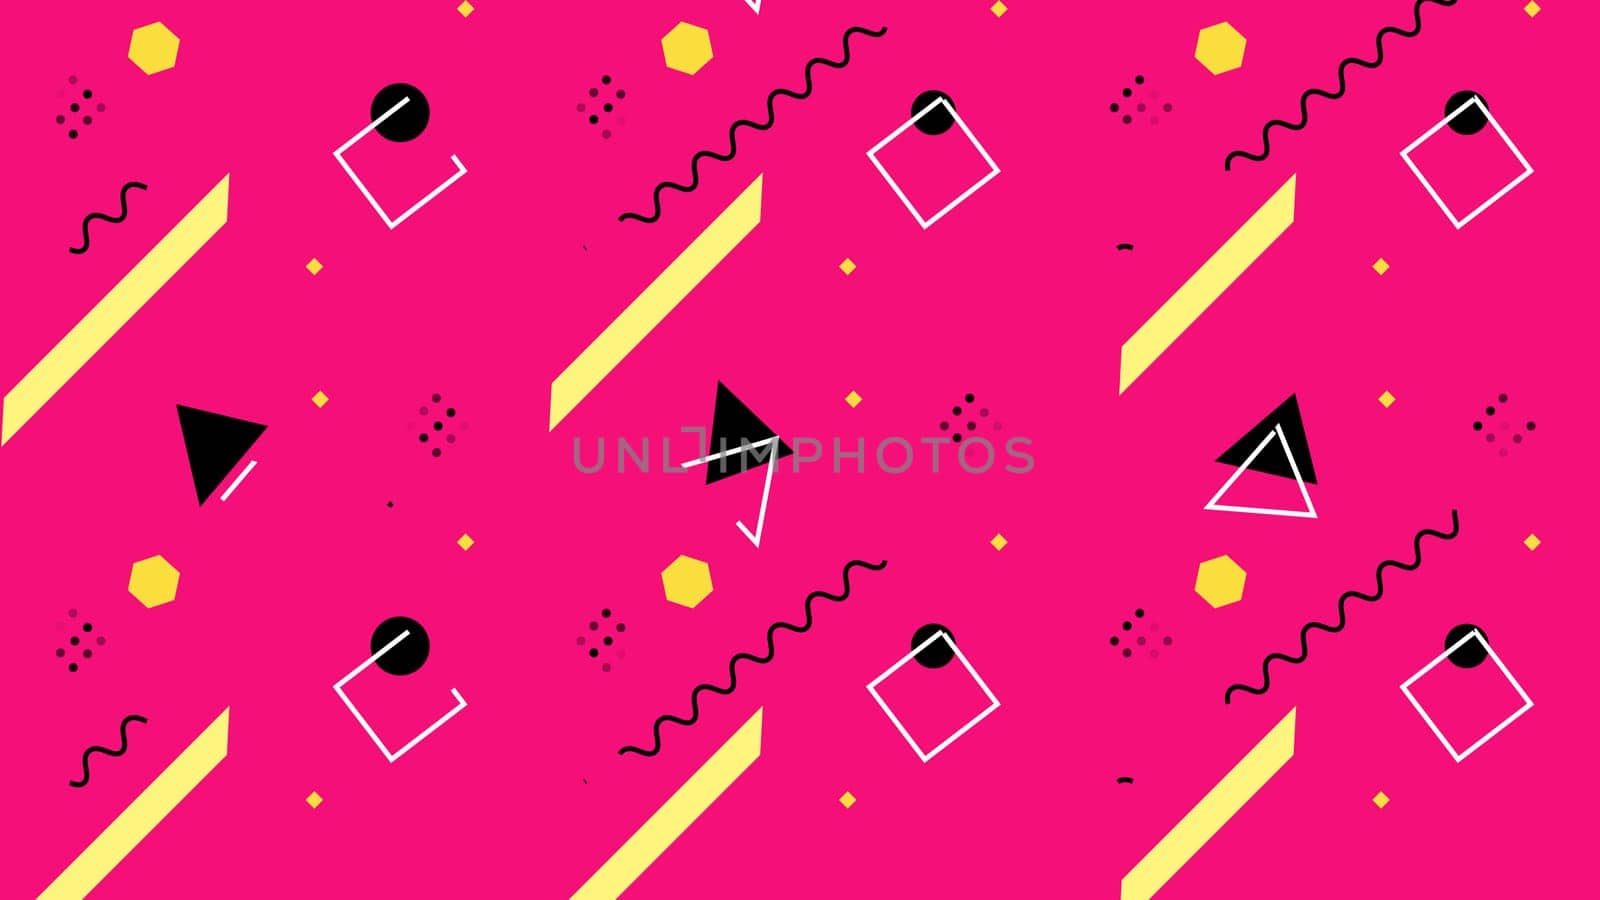 Geometric retro background pop art style with black triangle shapes on pink composition.